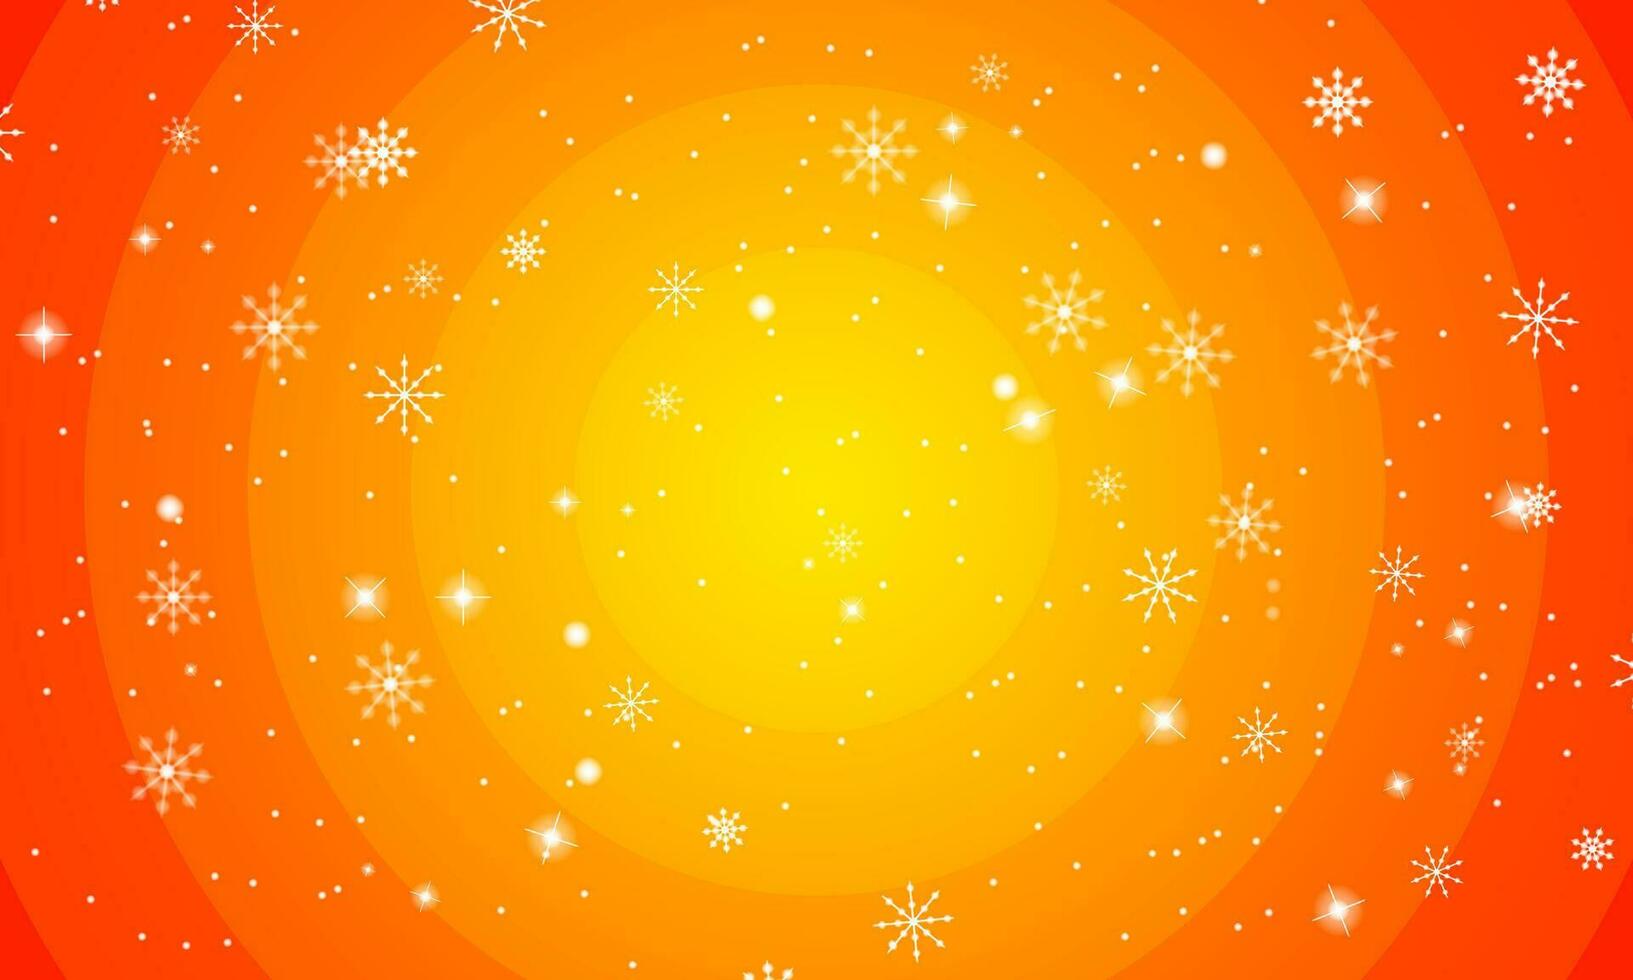 Abstract background with snow and star vector